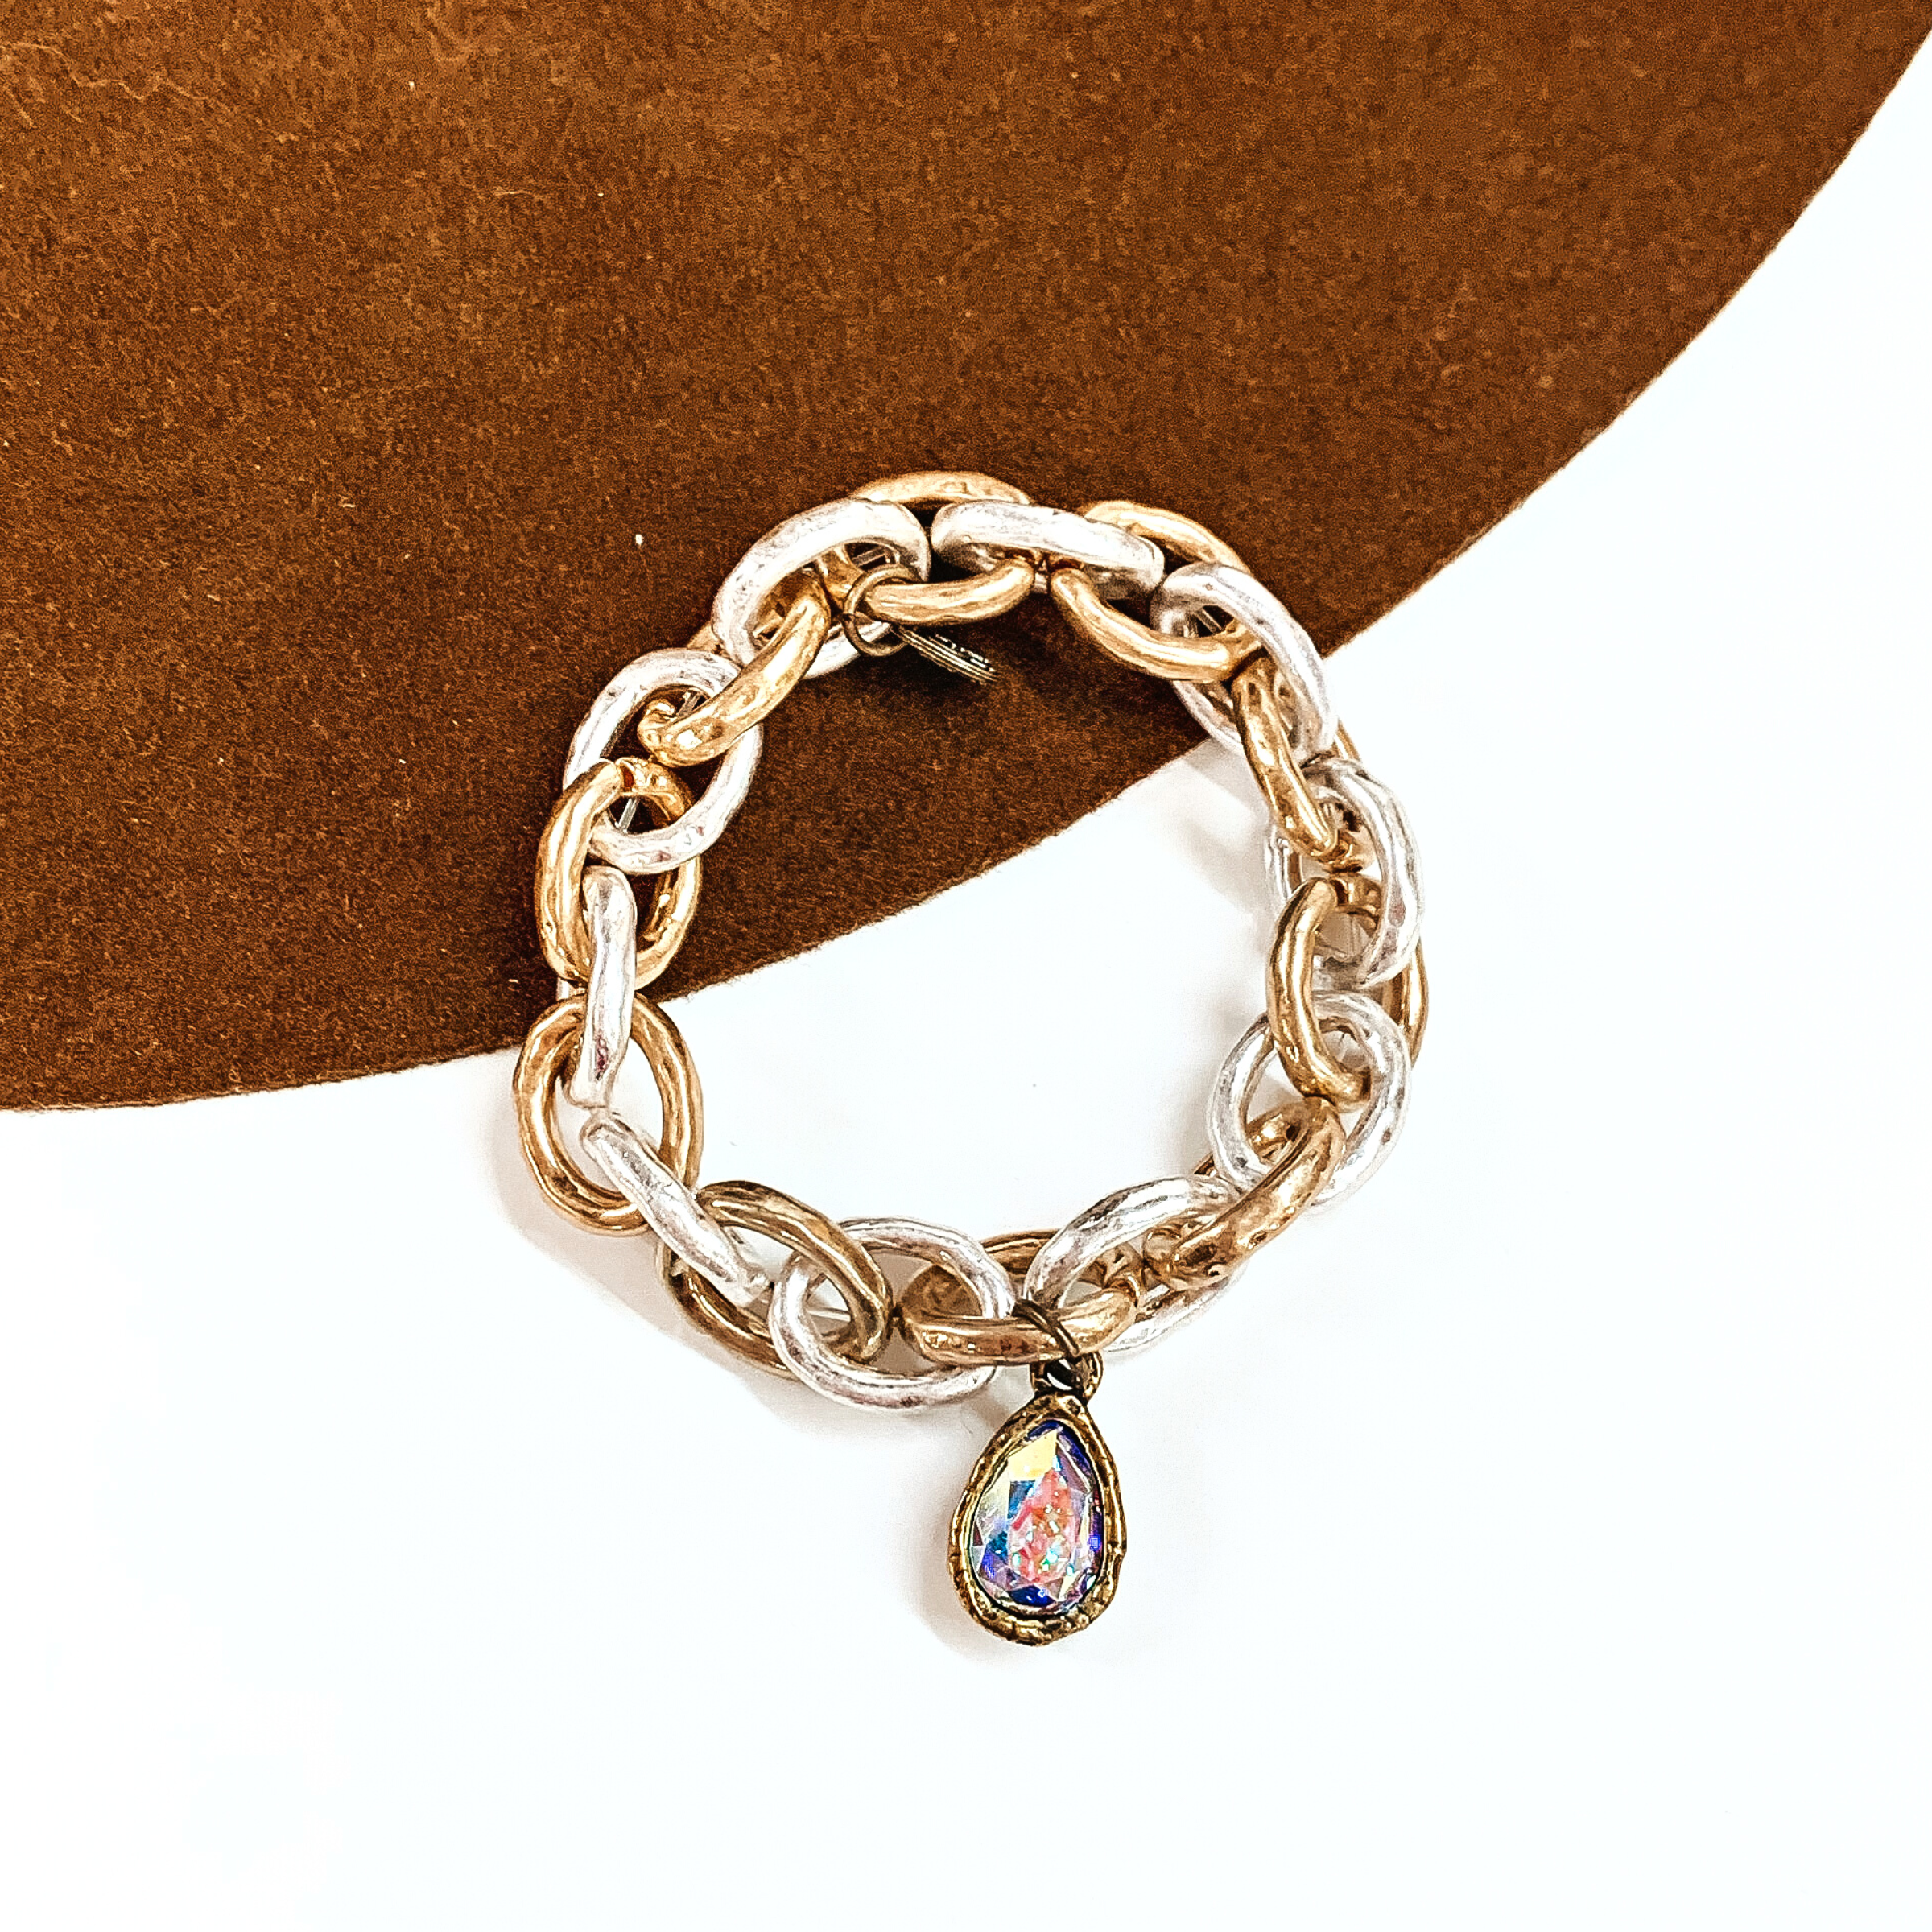 This is gold and silver thick chain bracelets with an AB crystal teardrop charm in a  bronze setting. This bracelet is laying on a brown felt hat and on a white background.